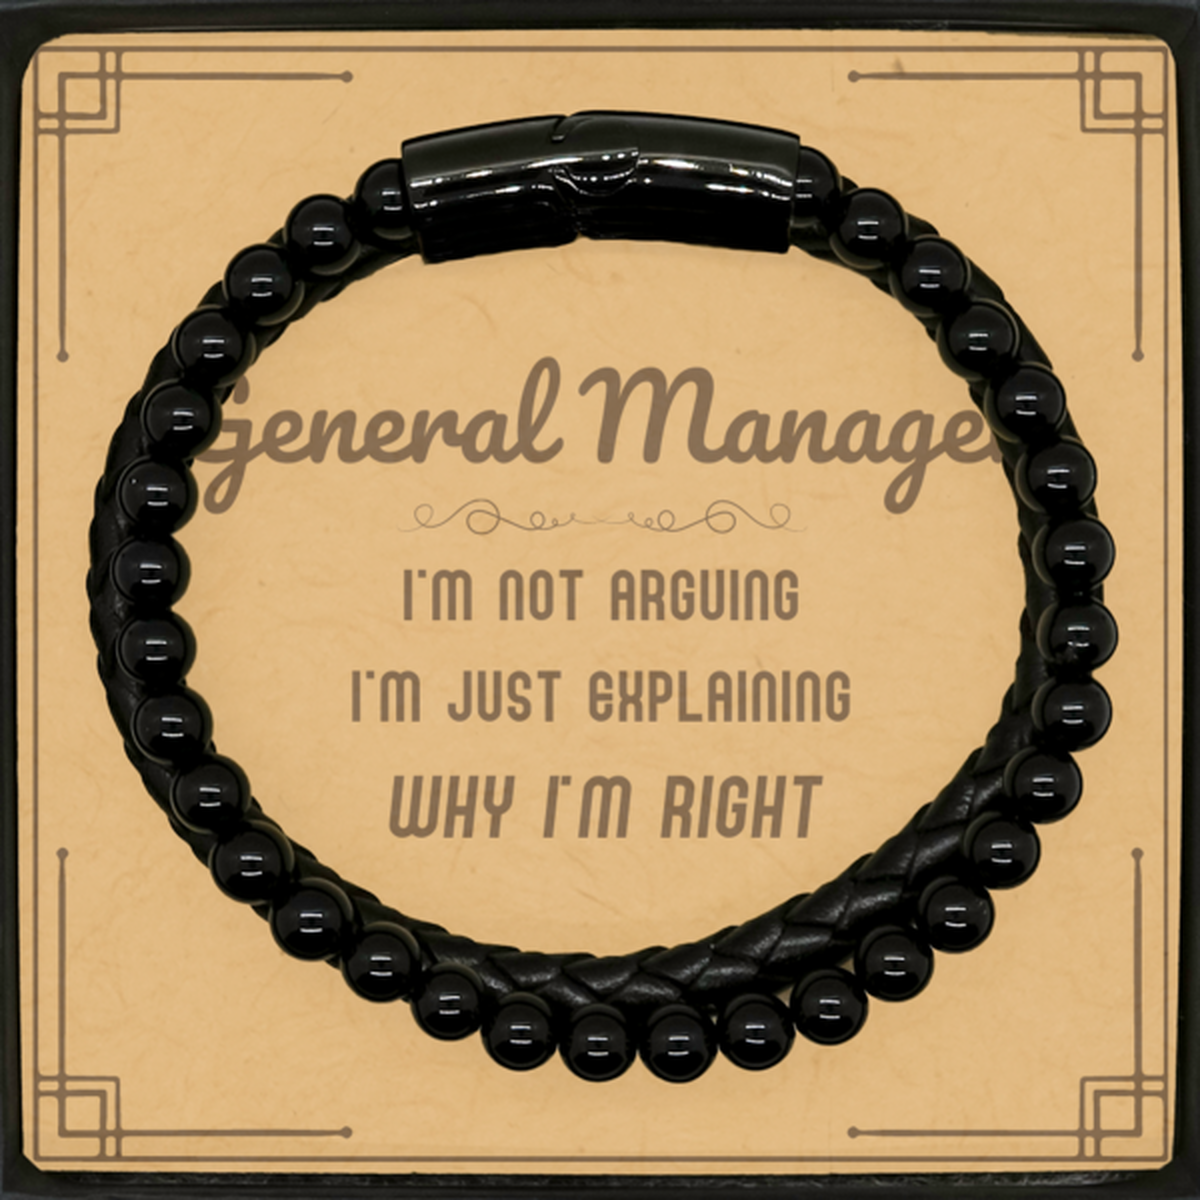 General Manager I'm not Arguing. I'm Just Explaining Why I'm RIGHT Stone Leather Bracelets, Funny Saying Quote General Manager Gifts For General Manager Message Card Graduation Birthday Christmas Gifts for Men Women Coworker